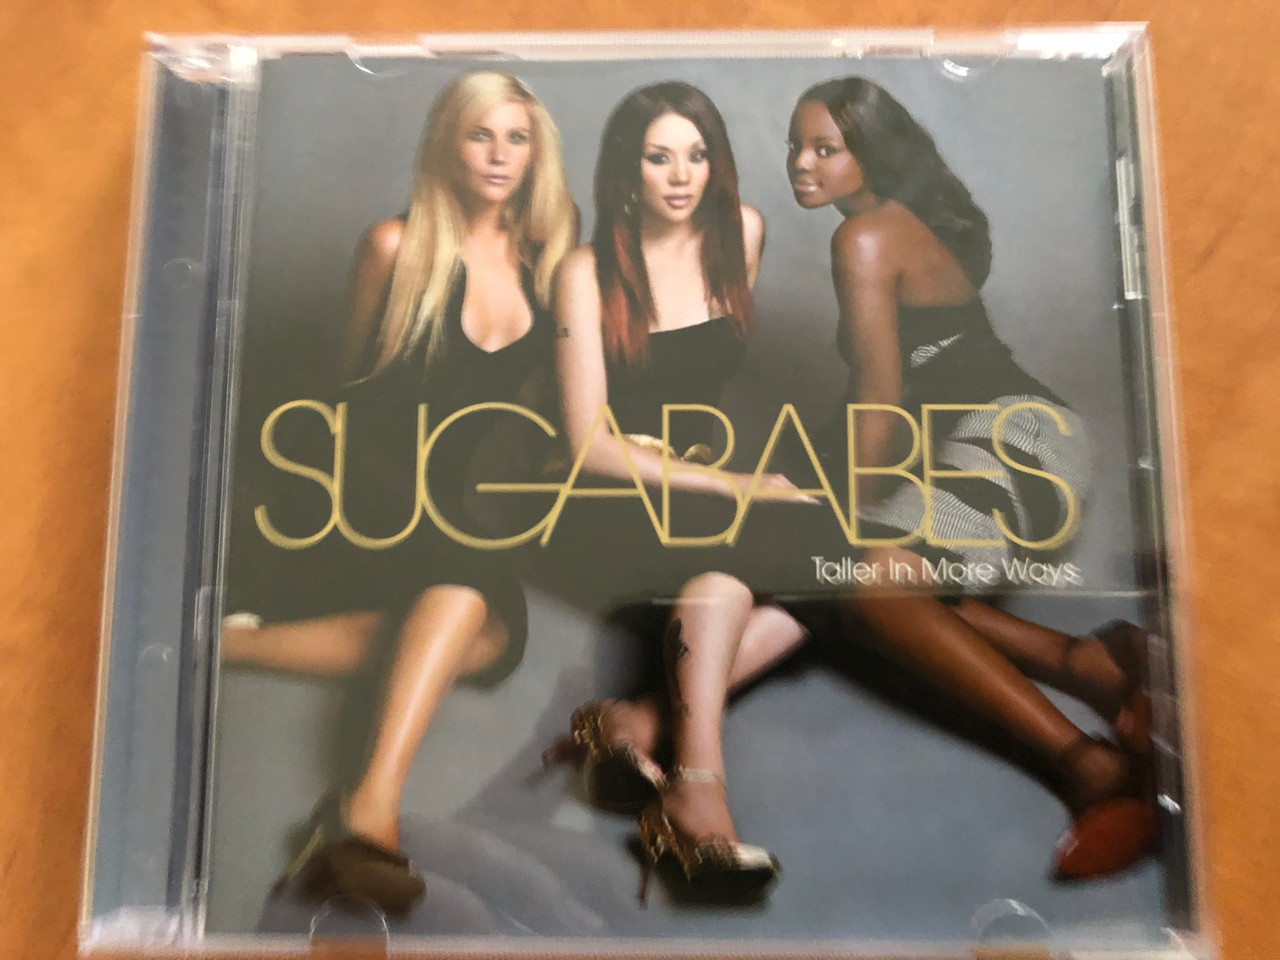 https://cdn10.bigcommerce.com/s-62bdpkt7pb/products/30767/images/181669/Sugababes_Taller_In_More_Ways_Island_Records_Audio_CD_2005_987_395_4_1__12345.1623827679.1280.1280.JPG?c=2&_ga=2.234906625.1829284140.1623917769-62128686.1623917769